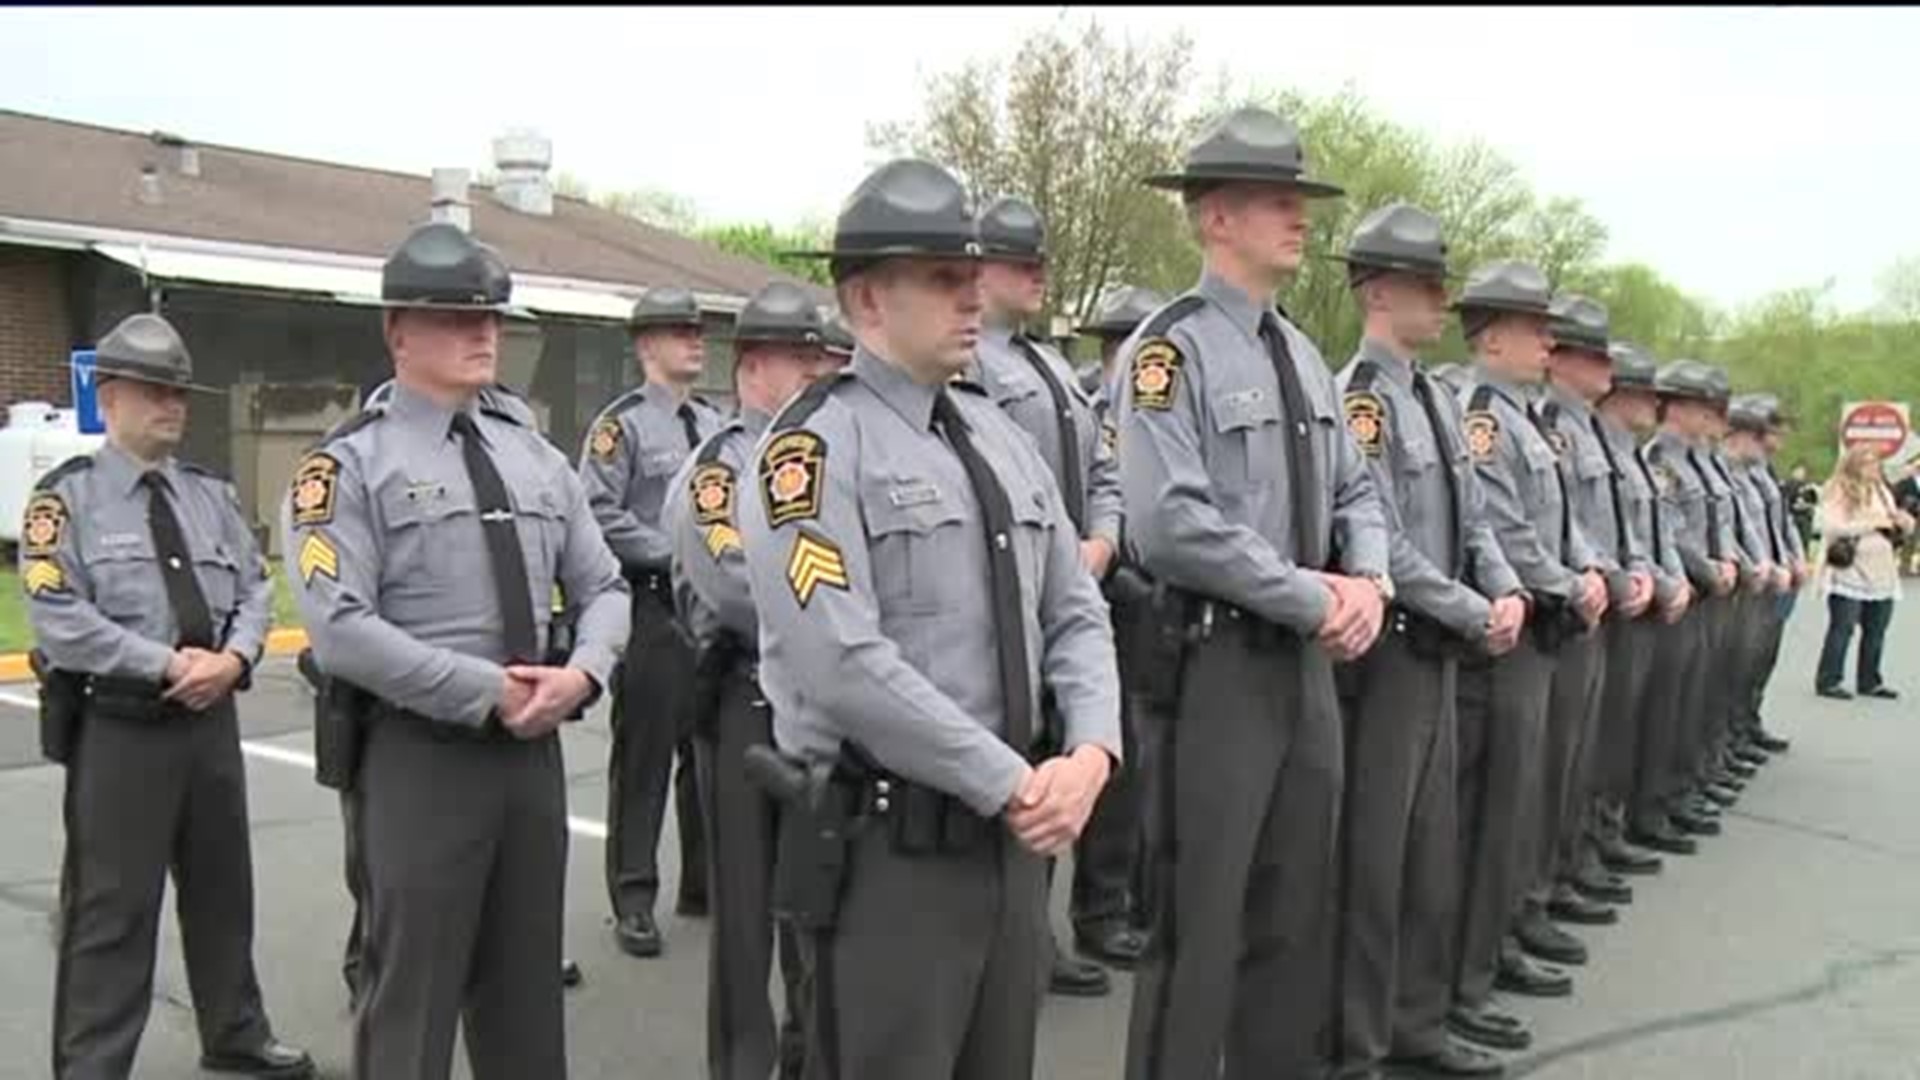 State Police Memorial Day in Wyoming